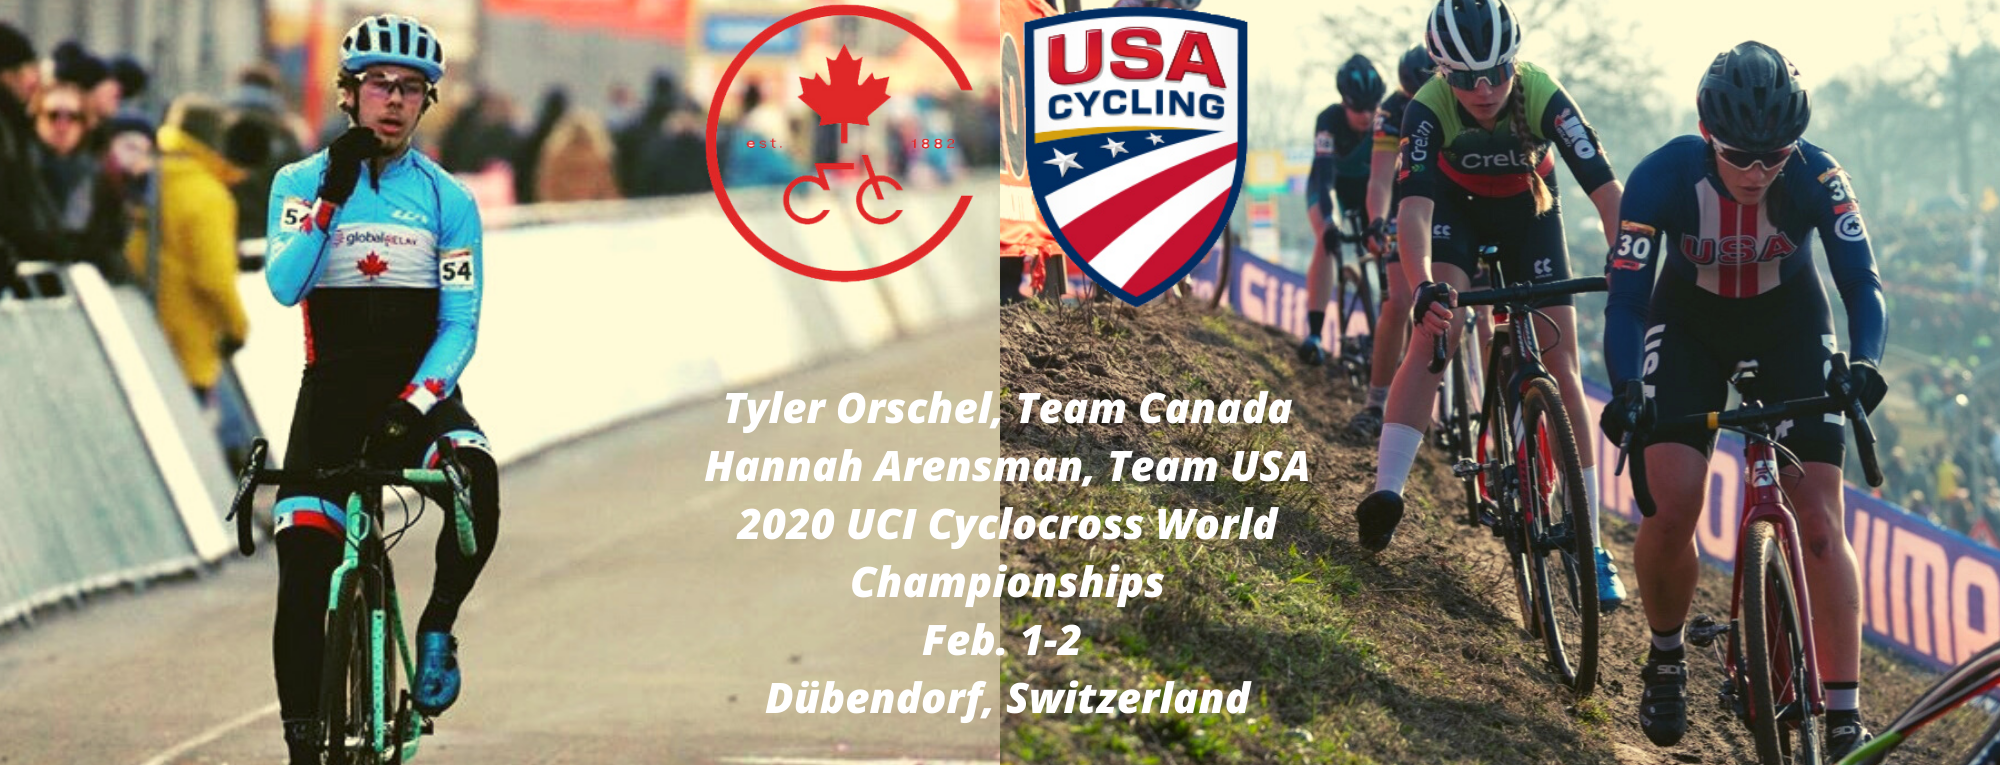 Arensman, Orschel of Brevard College Competing at Cyclocross World Championships